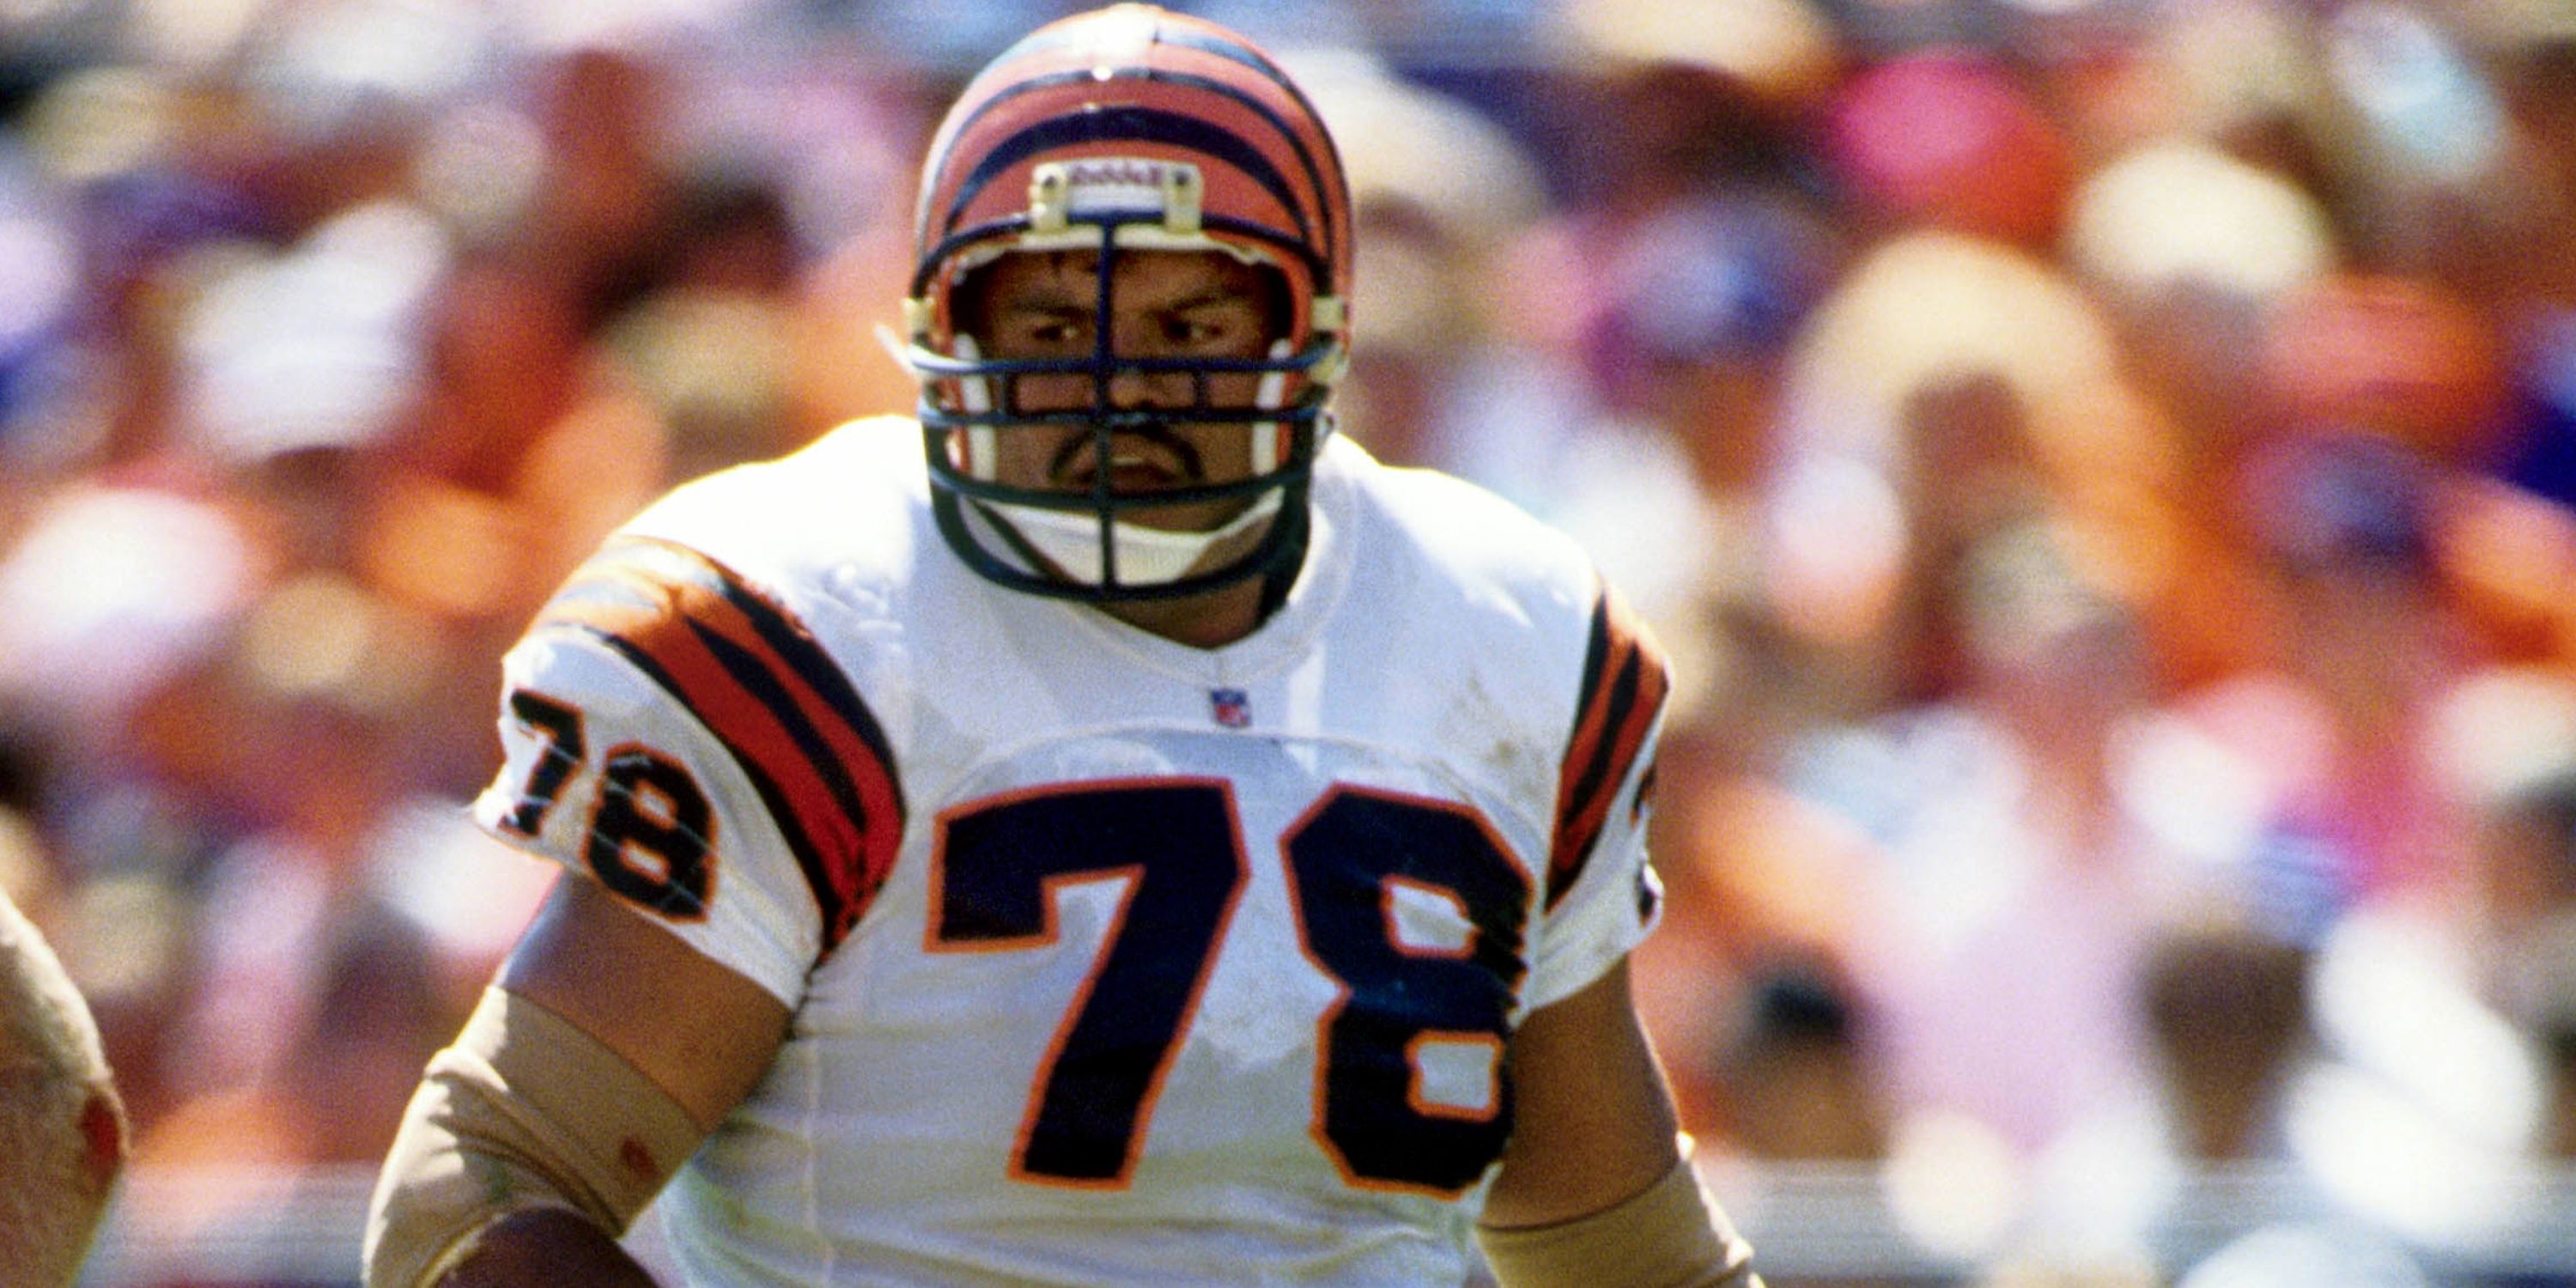 Top 10 Offensive Tackles in NFL History: Munoz, Ogden, and More